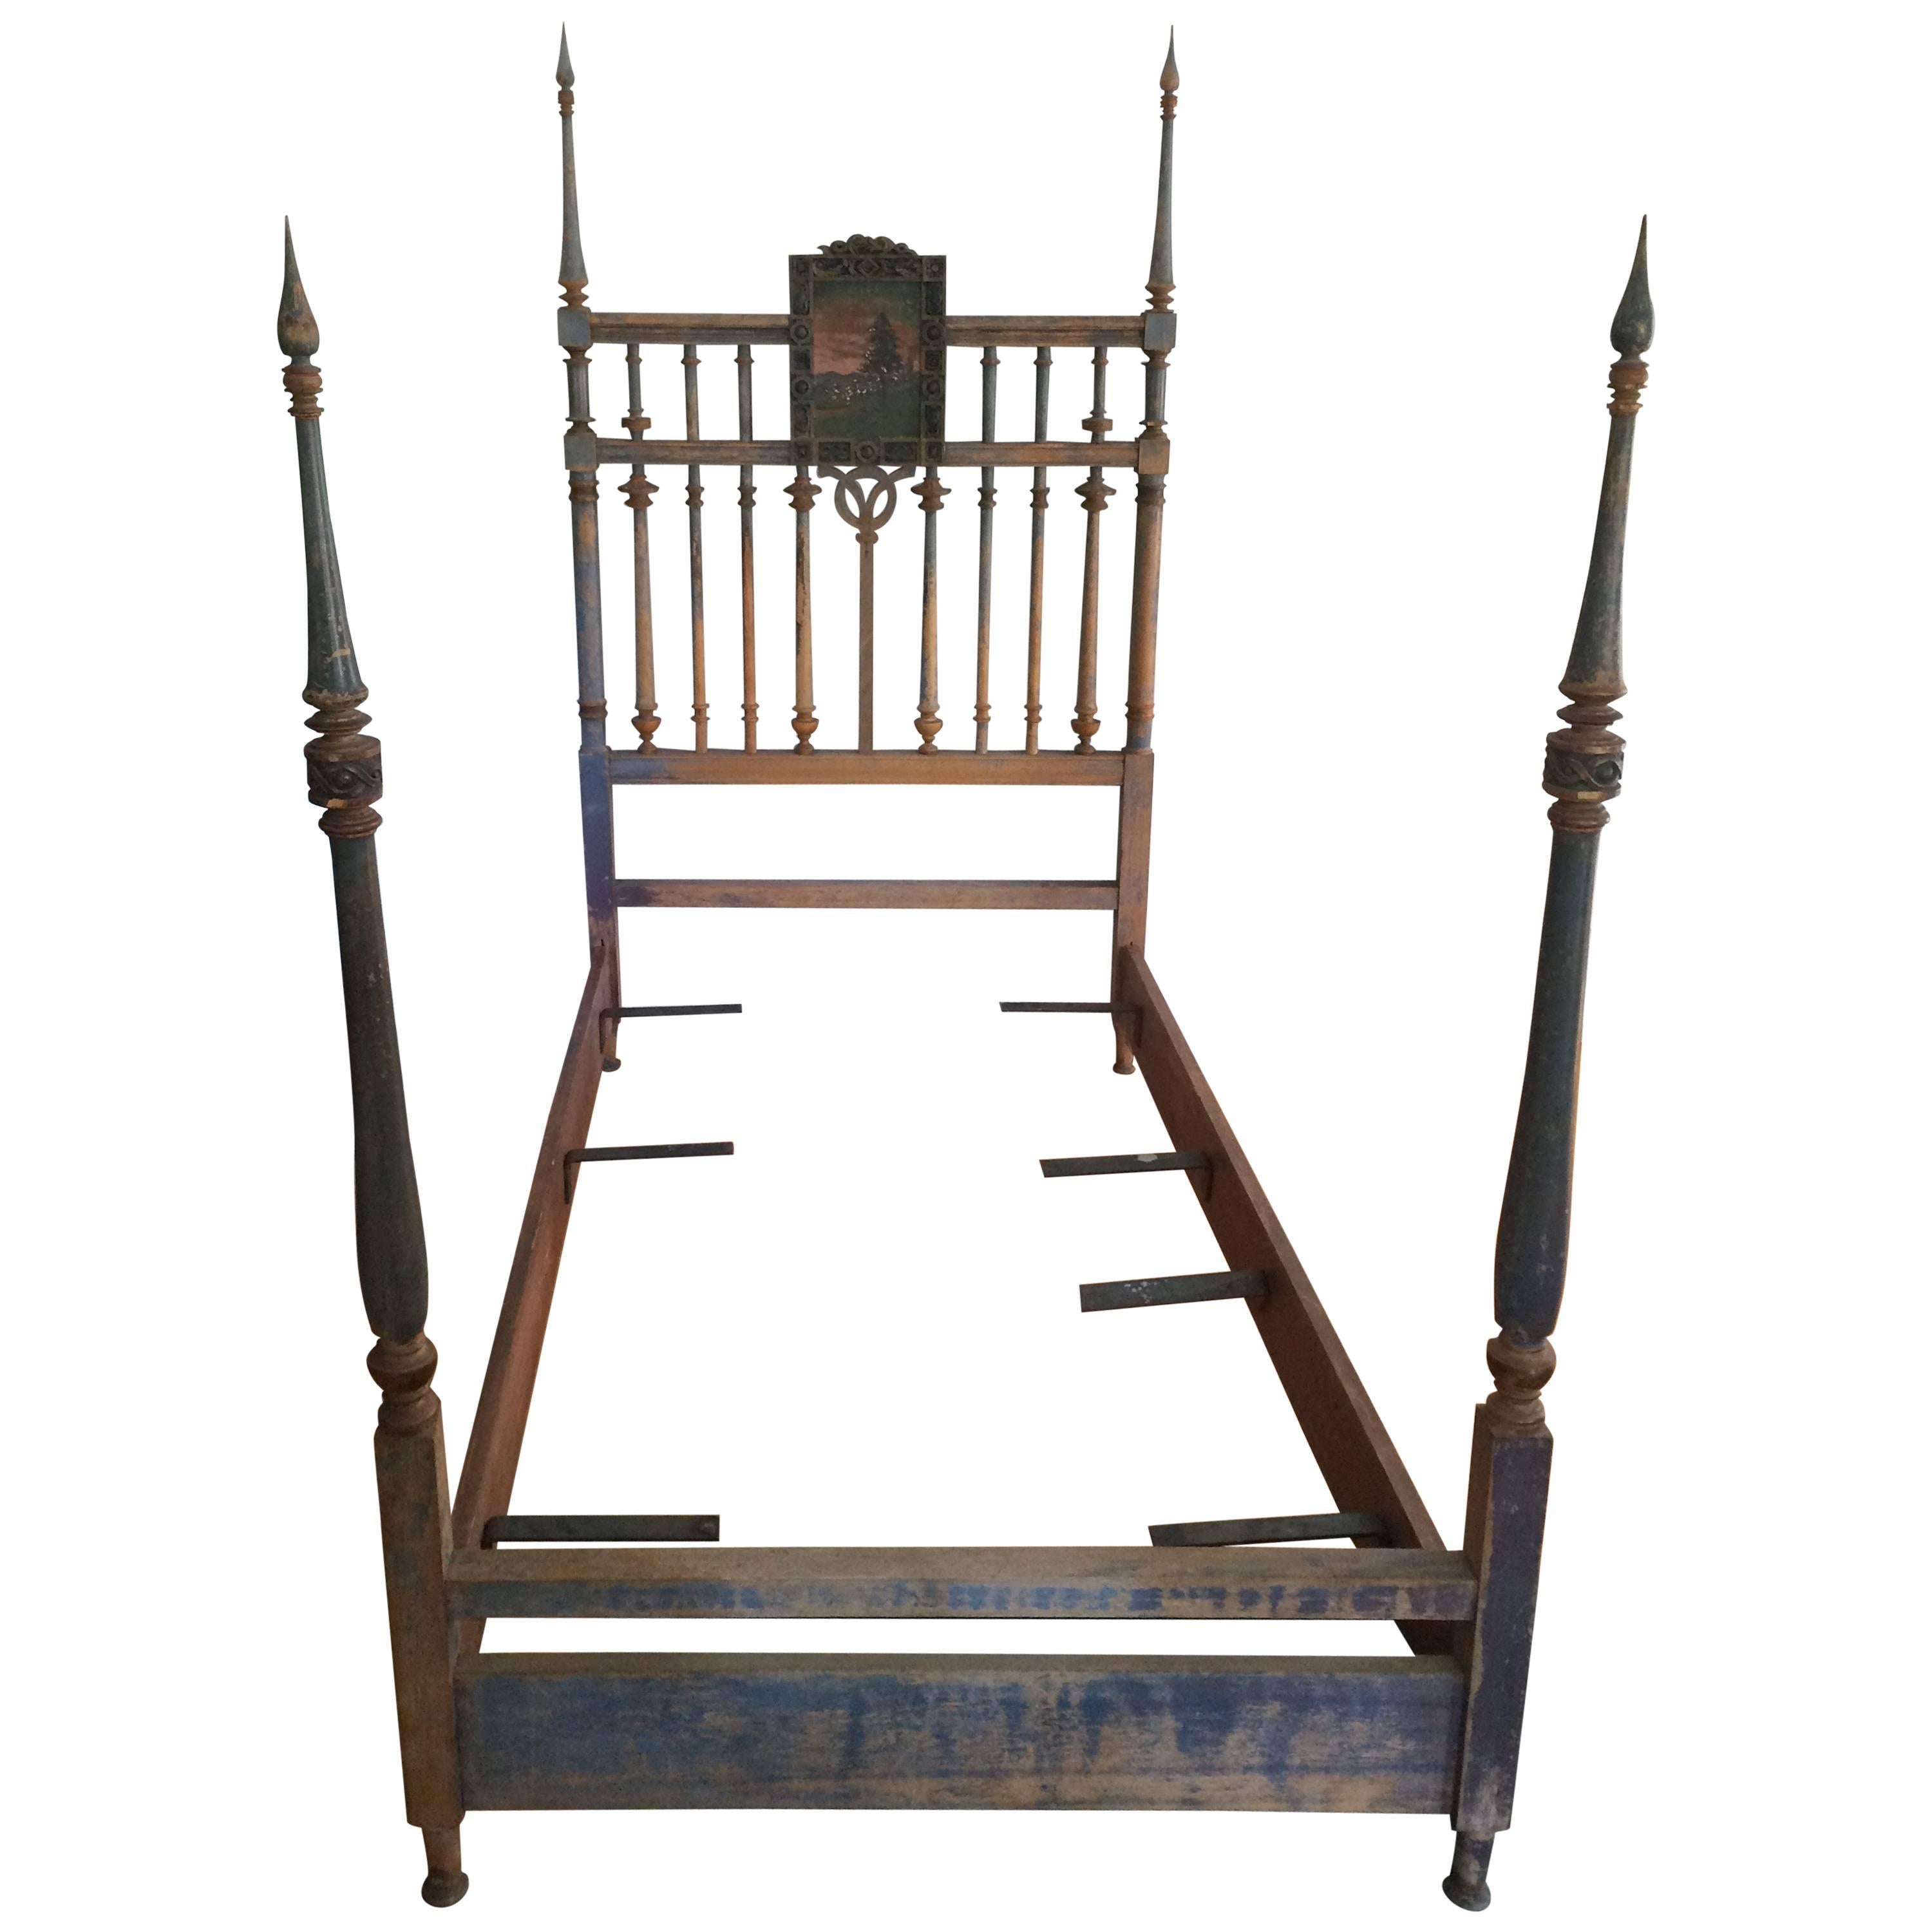 This is a rare and beautiful example of a 19th century European twin bed with hand-painted headboard... this piece is a beautiful addition to any guest room or would also be stunning in a main room of the home as a daybed.

This bed has a new twin